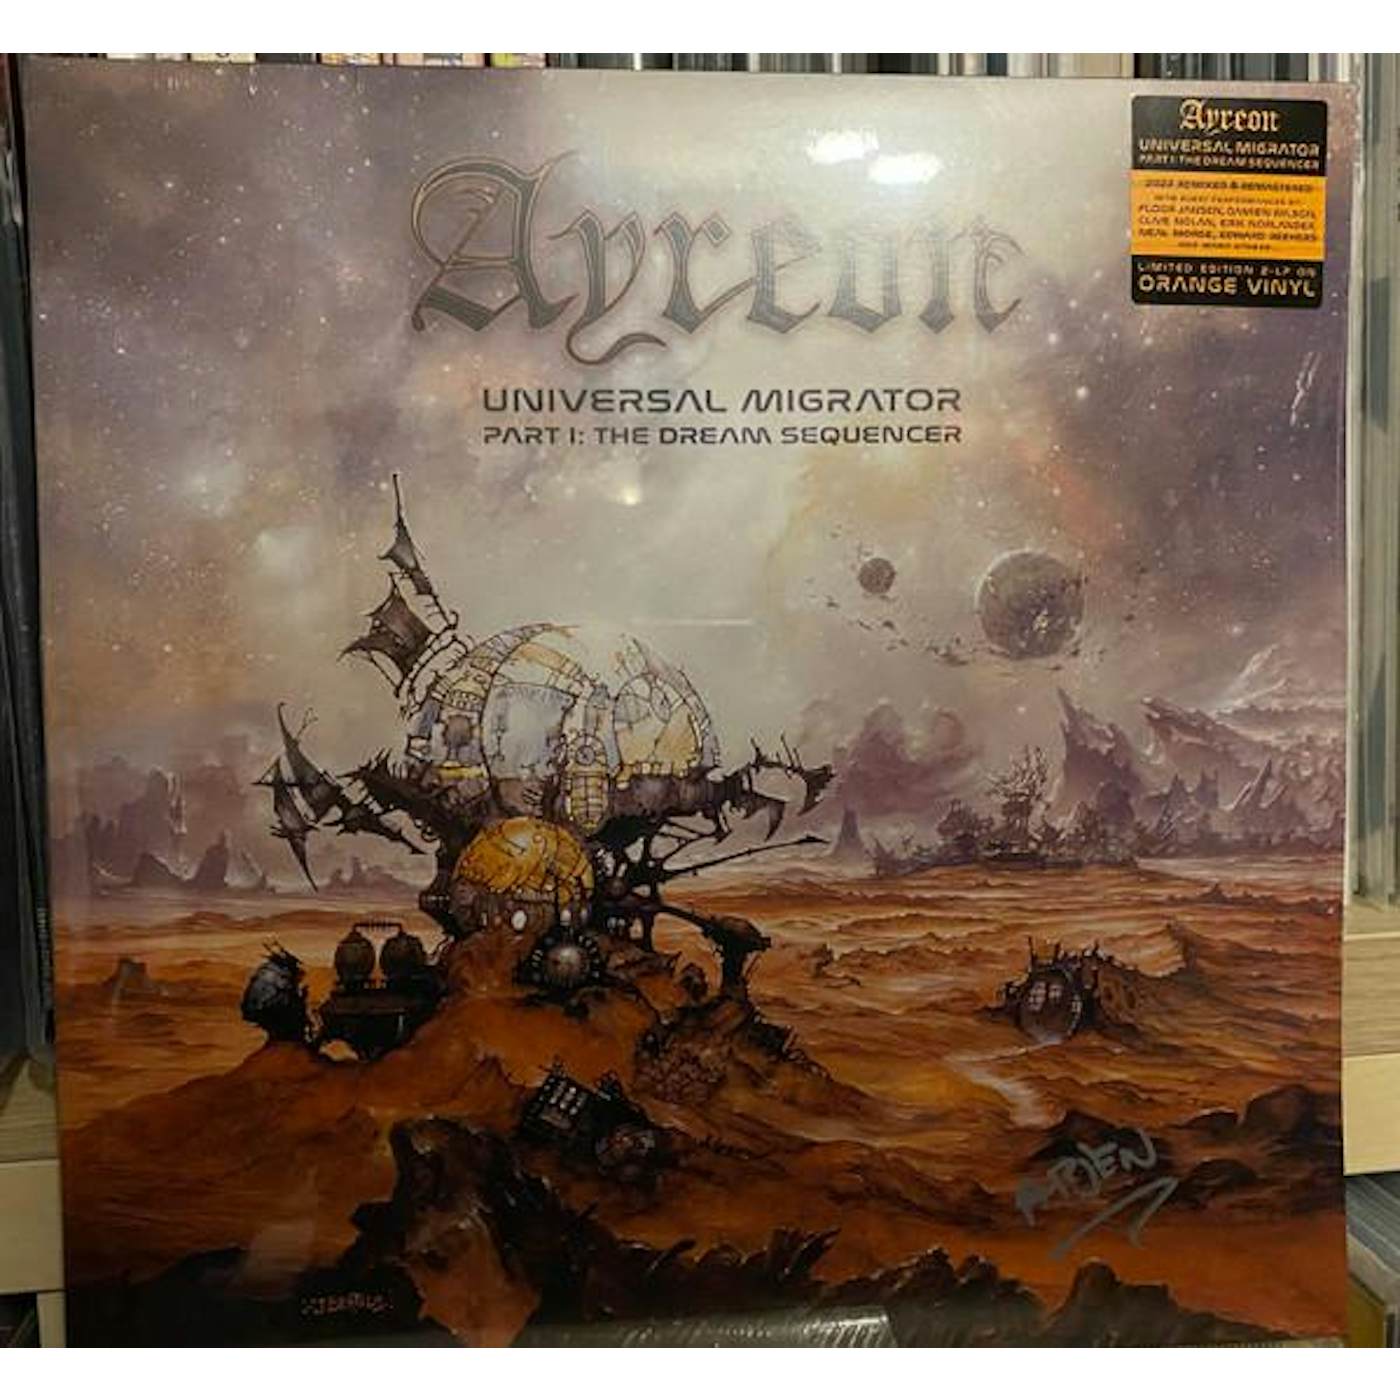 Ayreon UNIVERSAL MIGRATOR PART I: THE DREAM SEQUENCER Vinyl Record